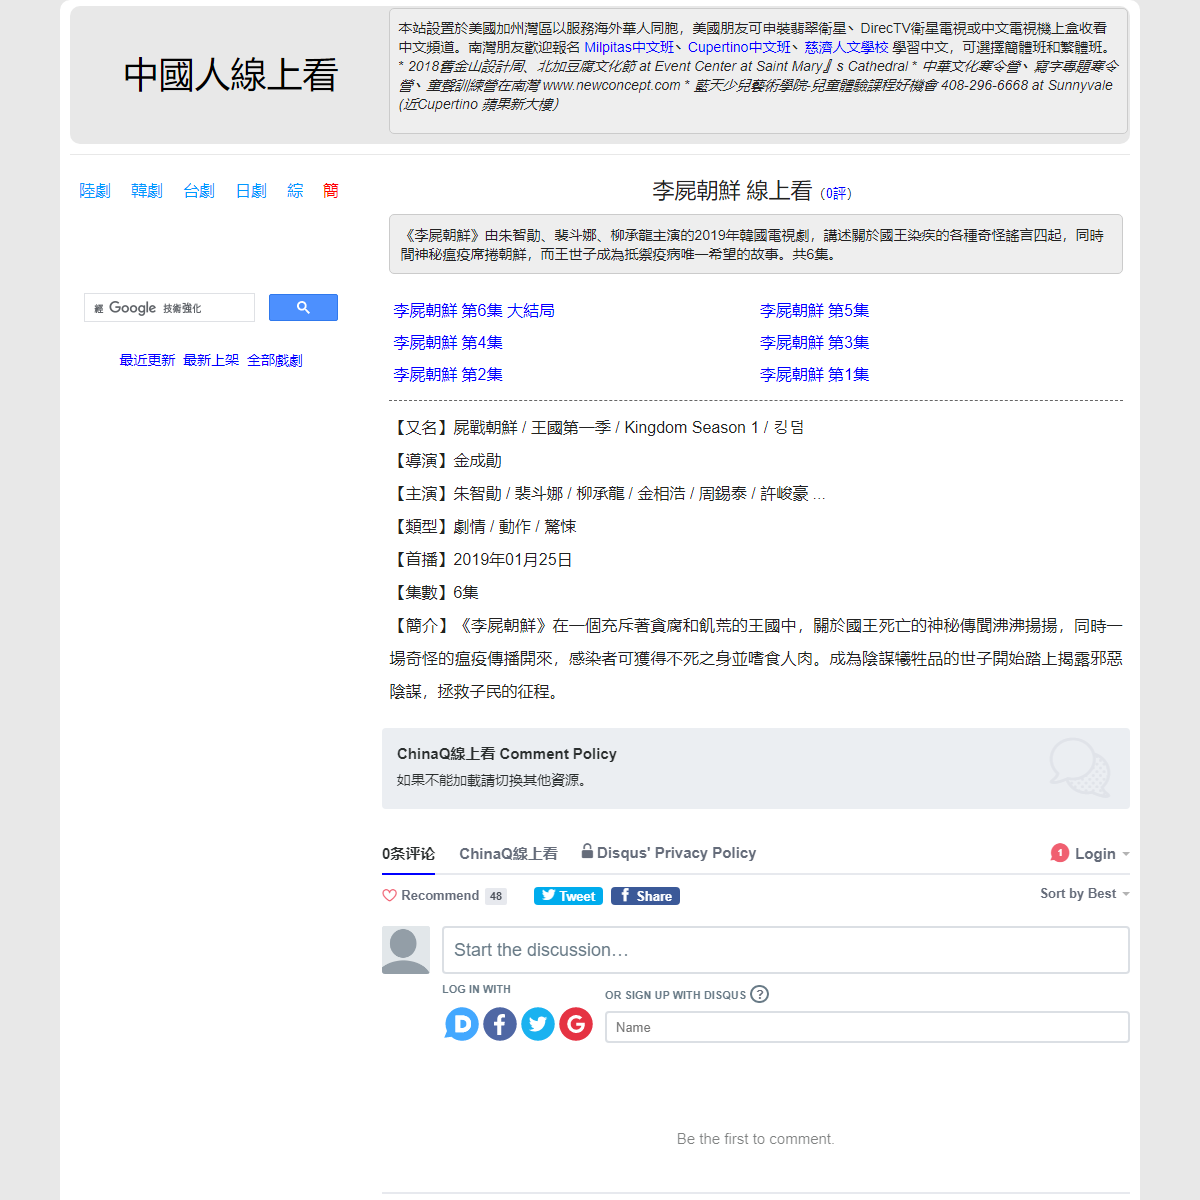 A complete backup of https://chinaq.tv/kr190125/